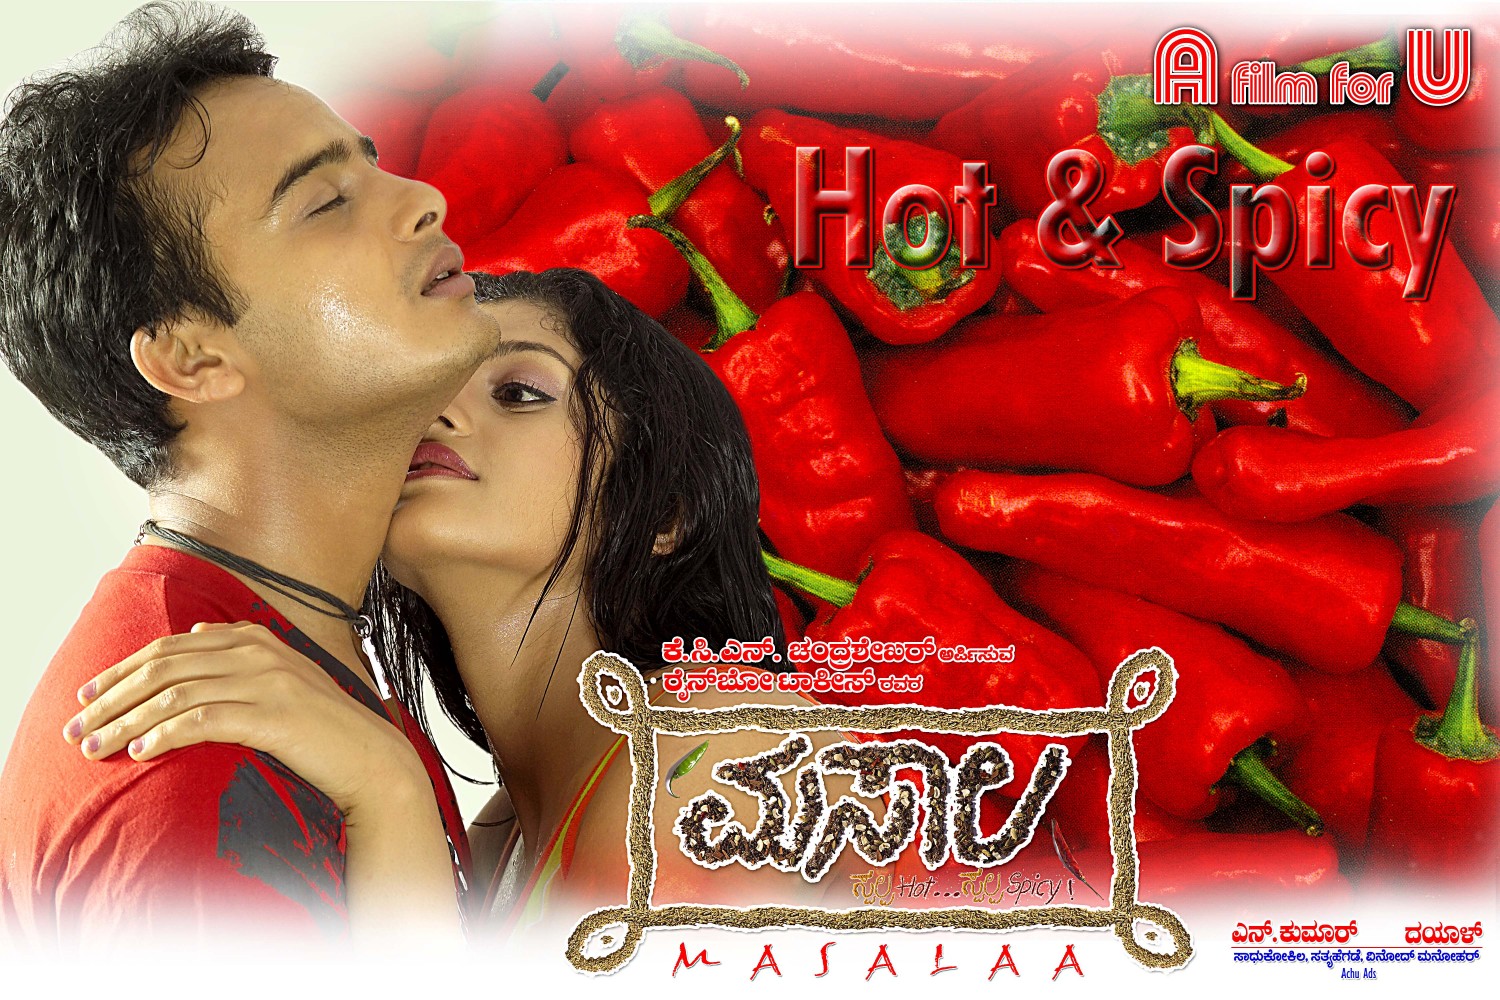 Extra Large Movie Poster Image for Masalaa (#2 of 4)